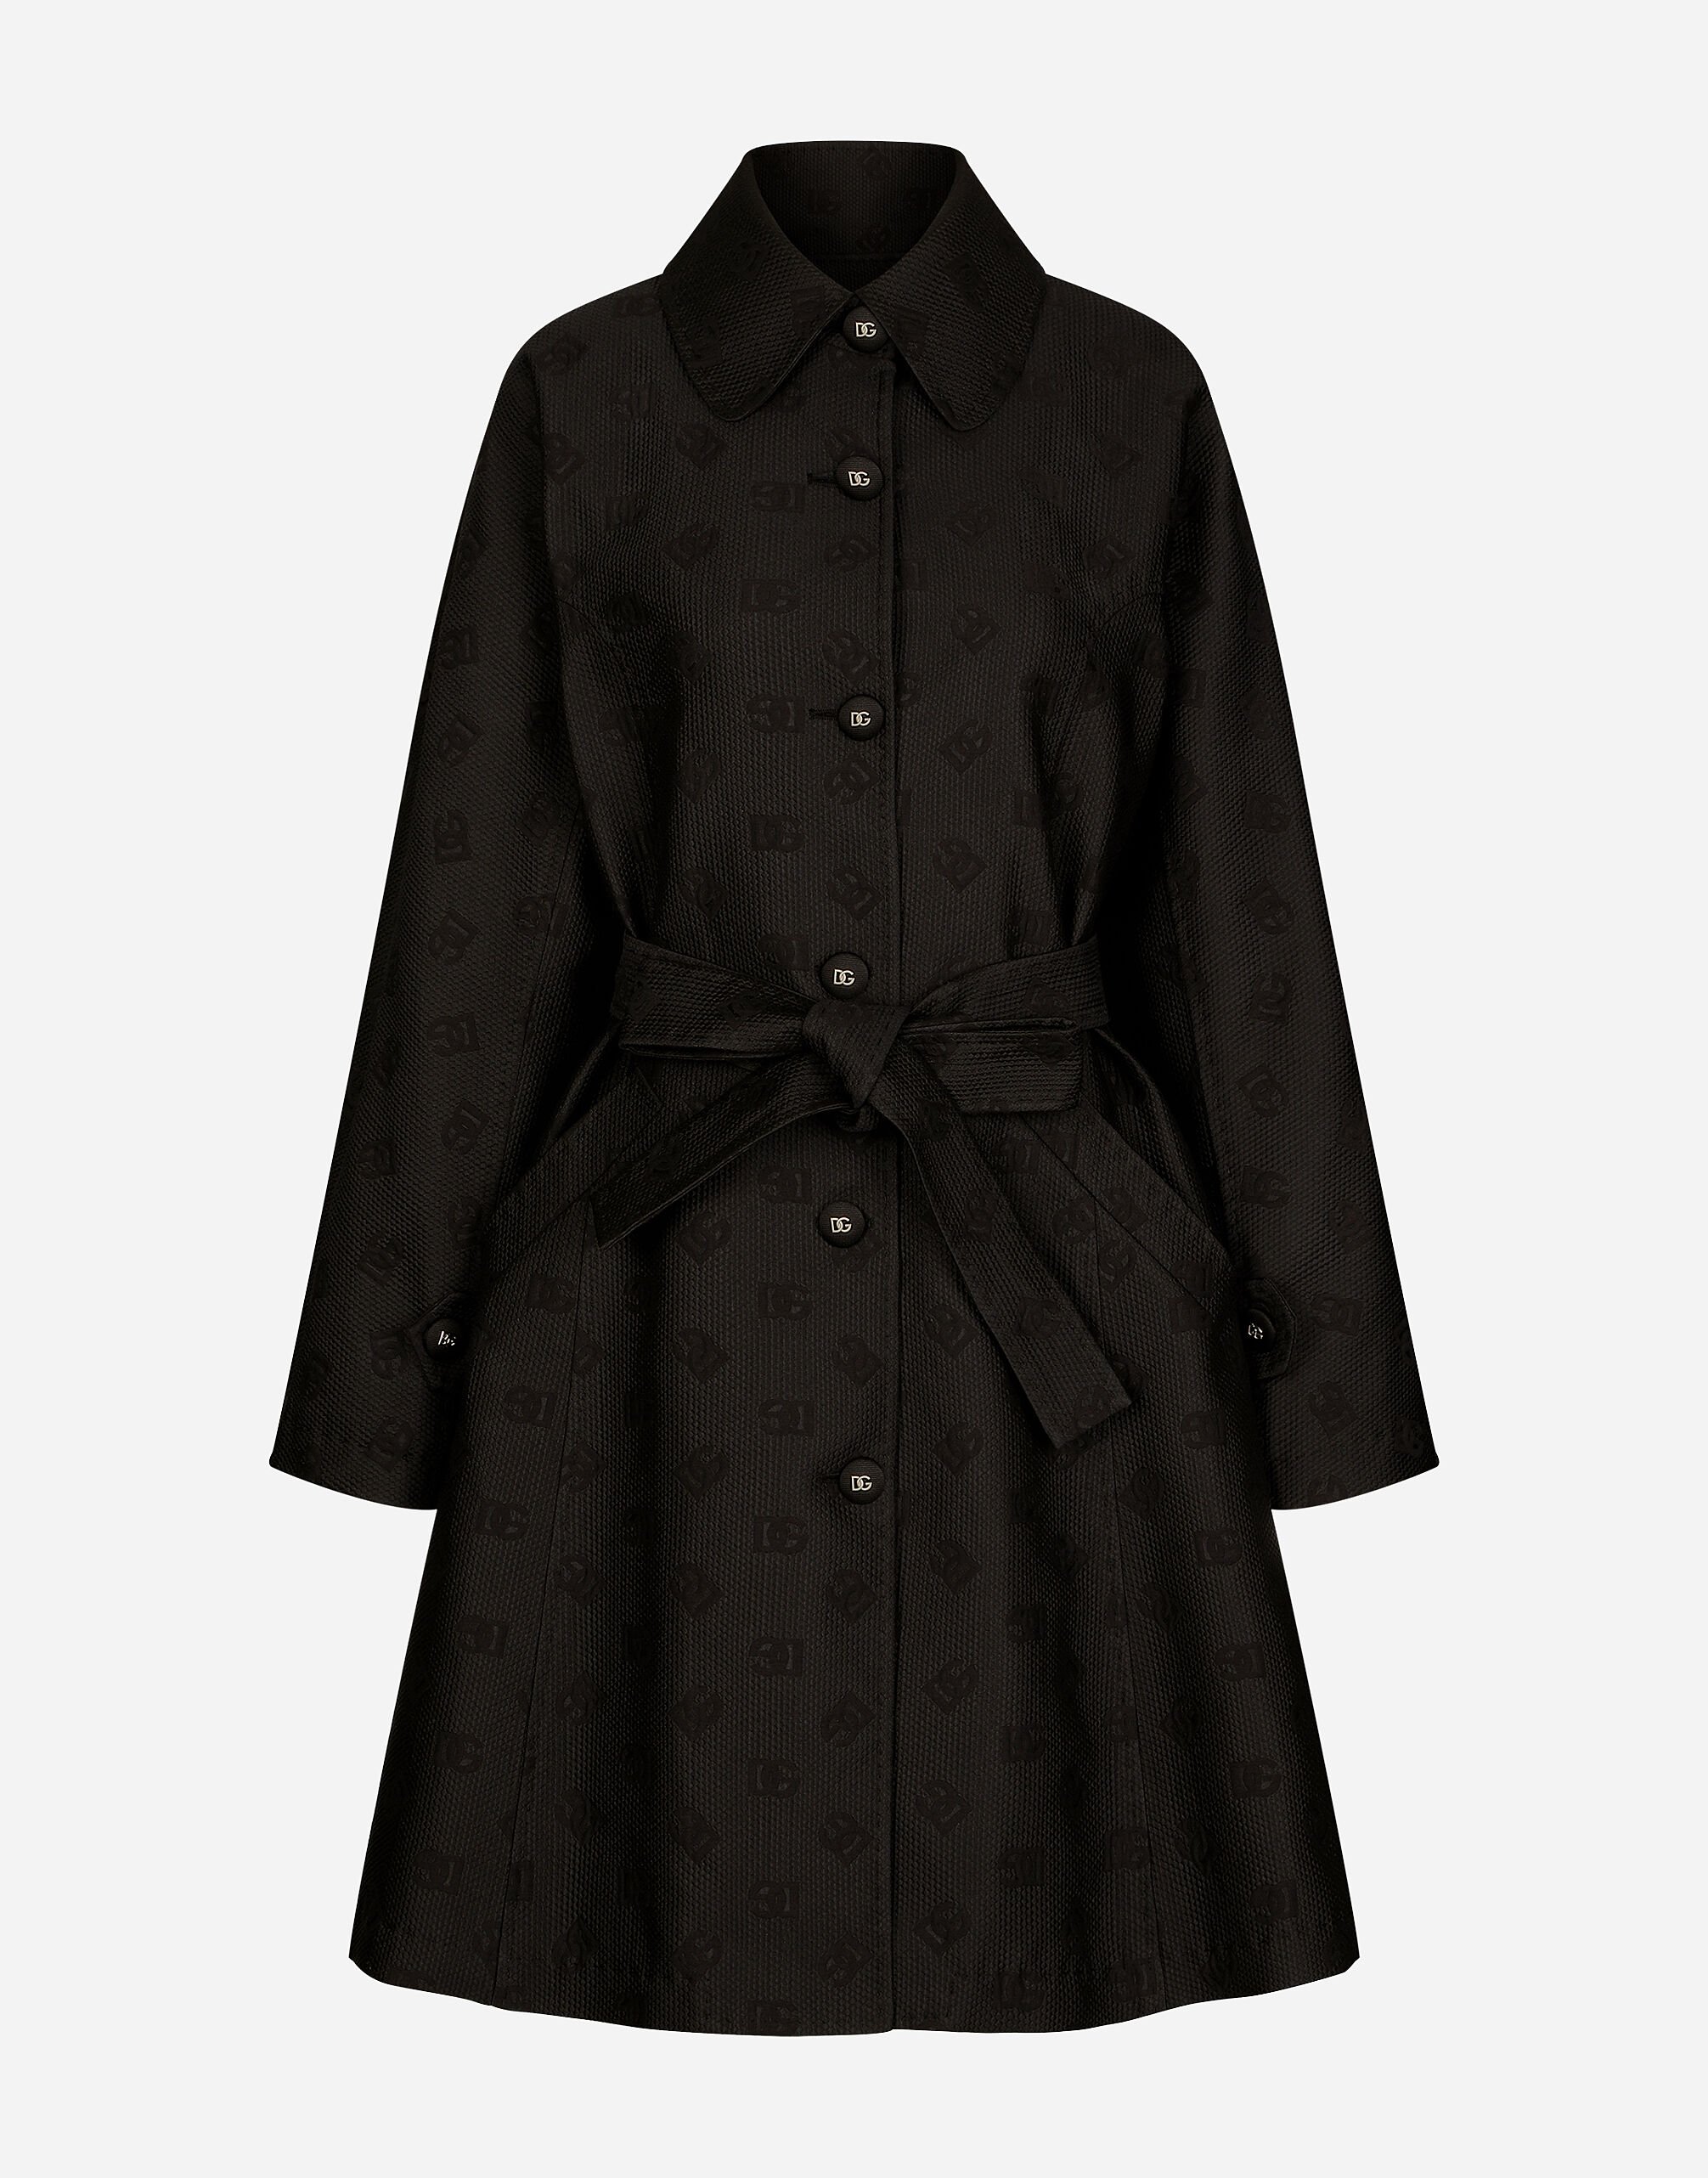 Dolce & Gabbana Belted jacquard coat with DG logo Black F0CTFTFUSYS